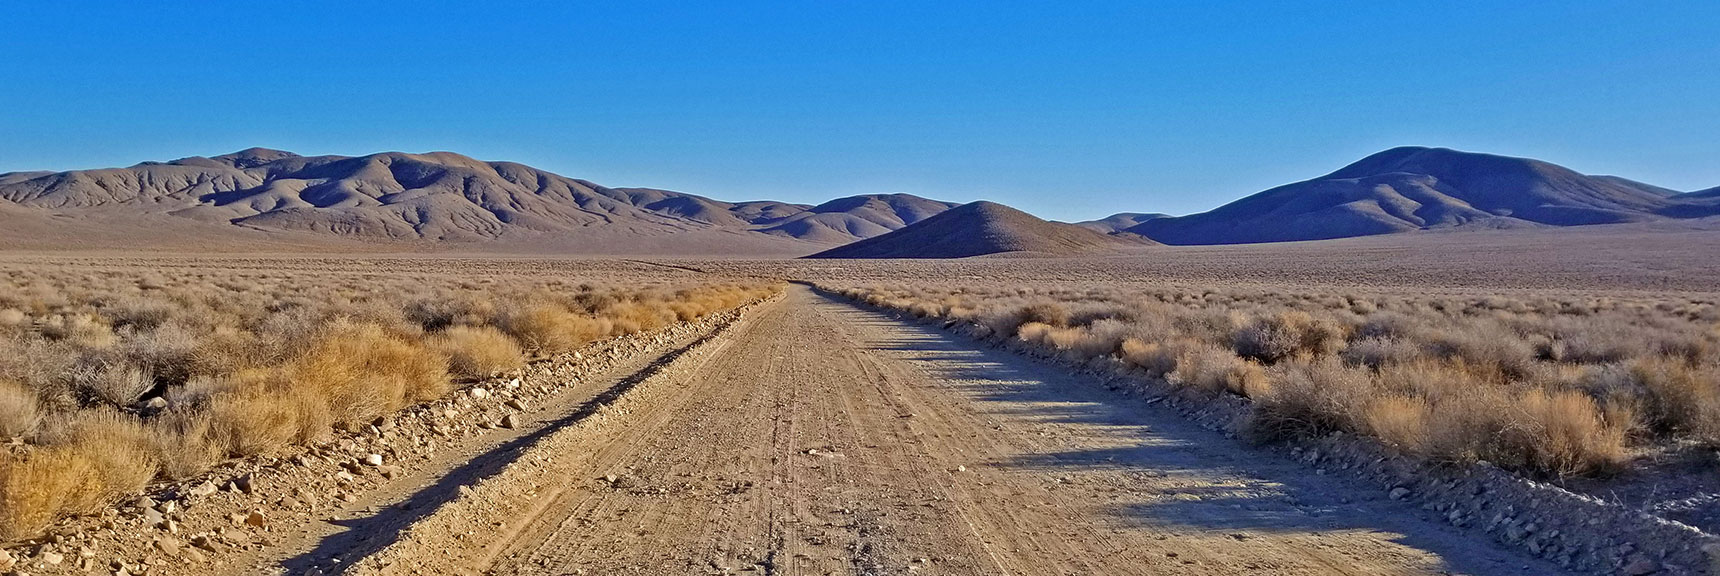 Heading Up Aguereberry Point Road, Freshly Graded, Good for 2WD Vehicles | Eureka Mine, Harrisburg, Cashier Mill, Death Valley, California